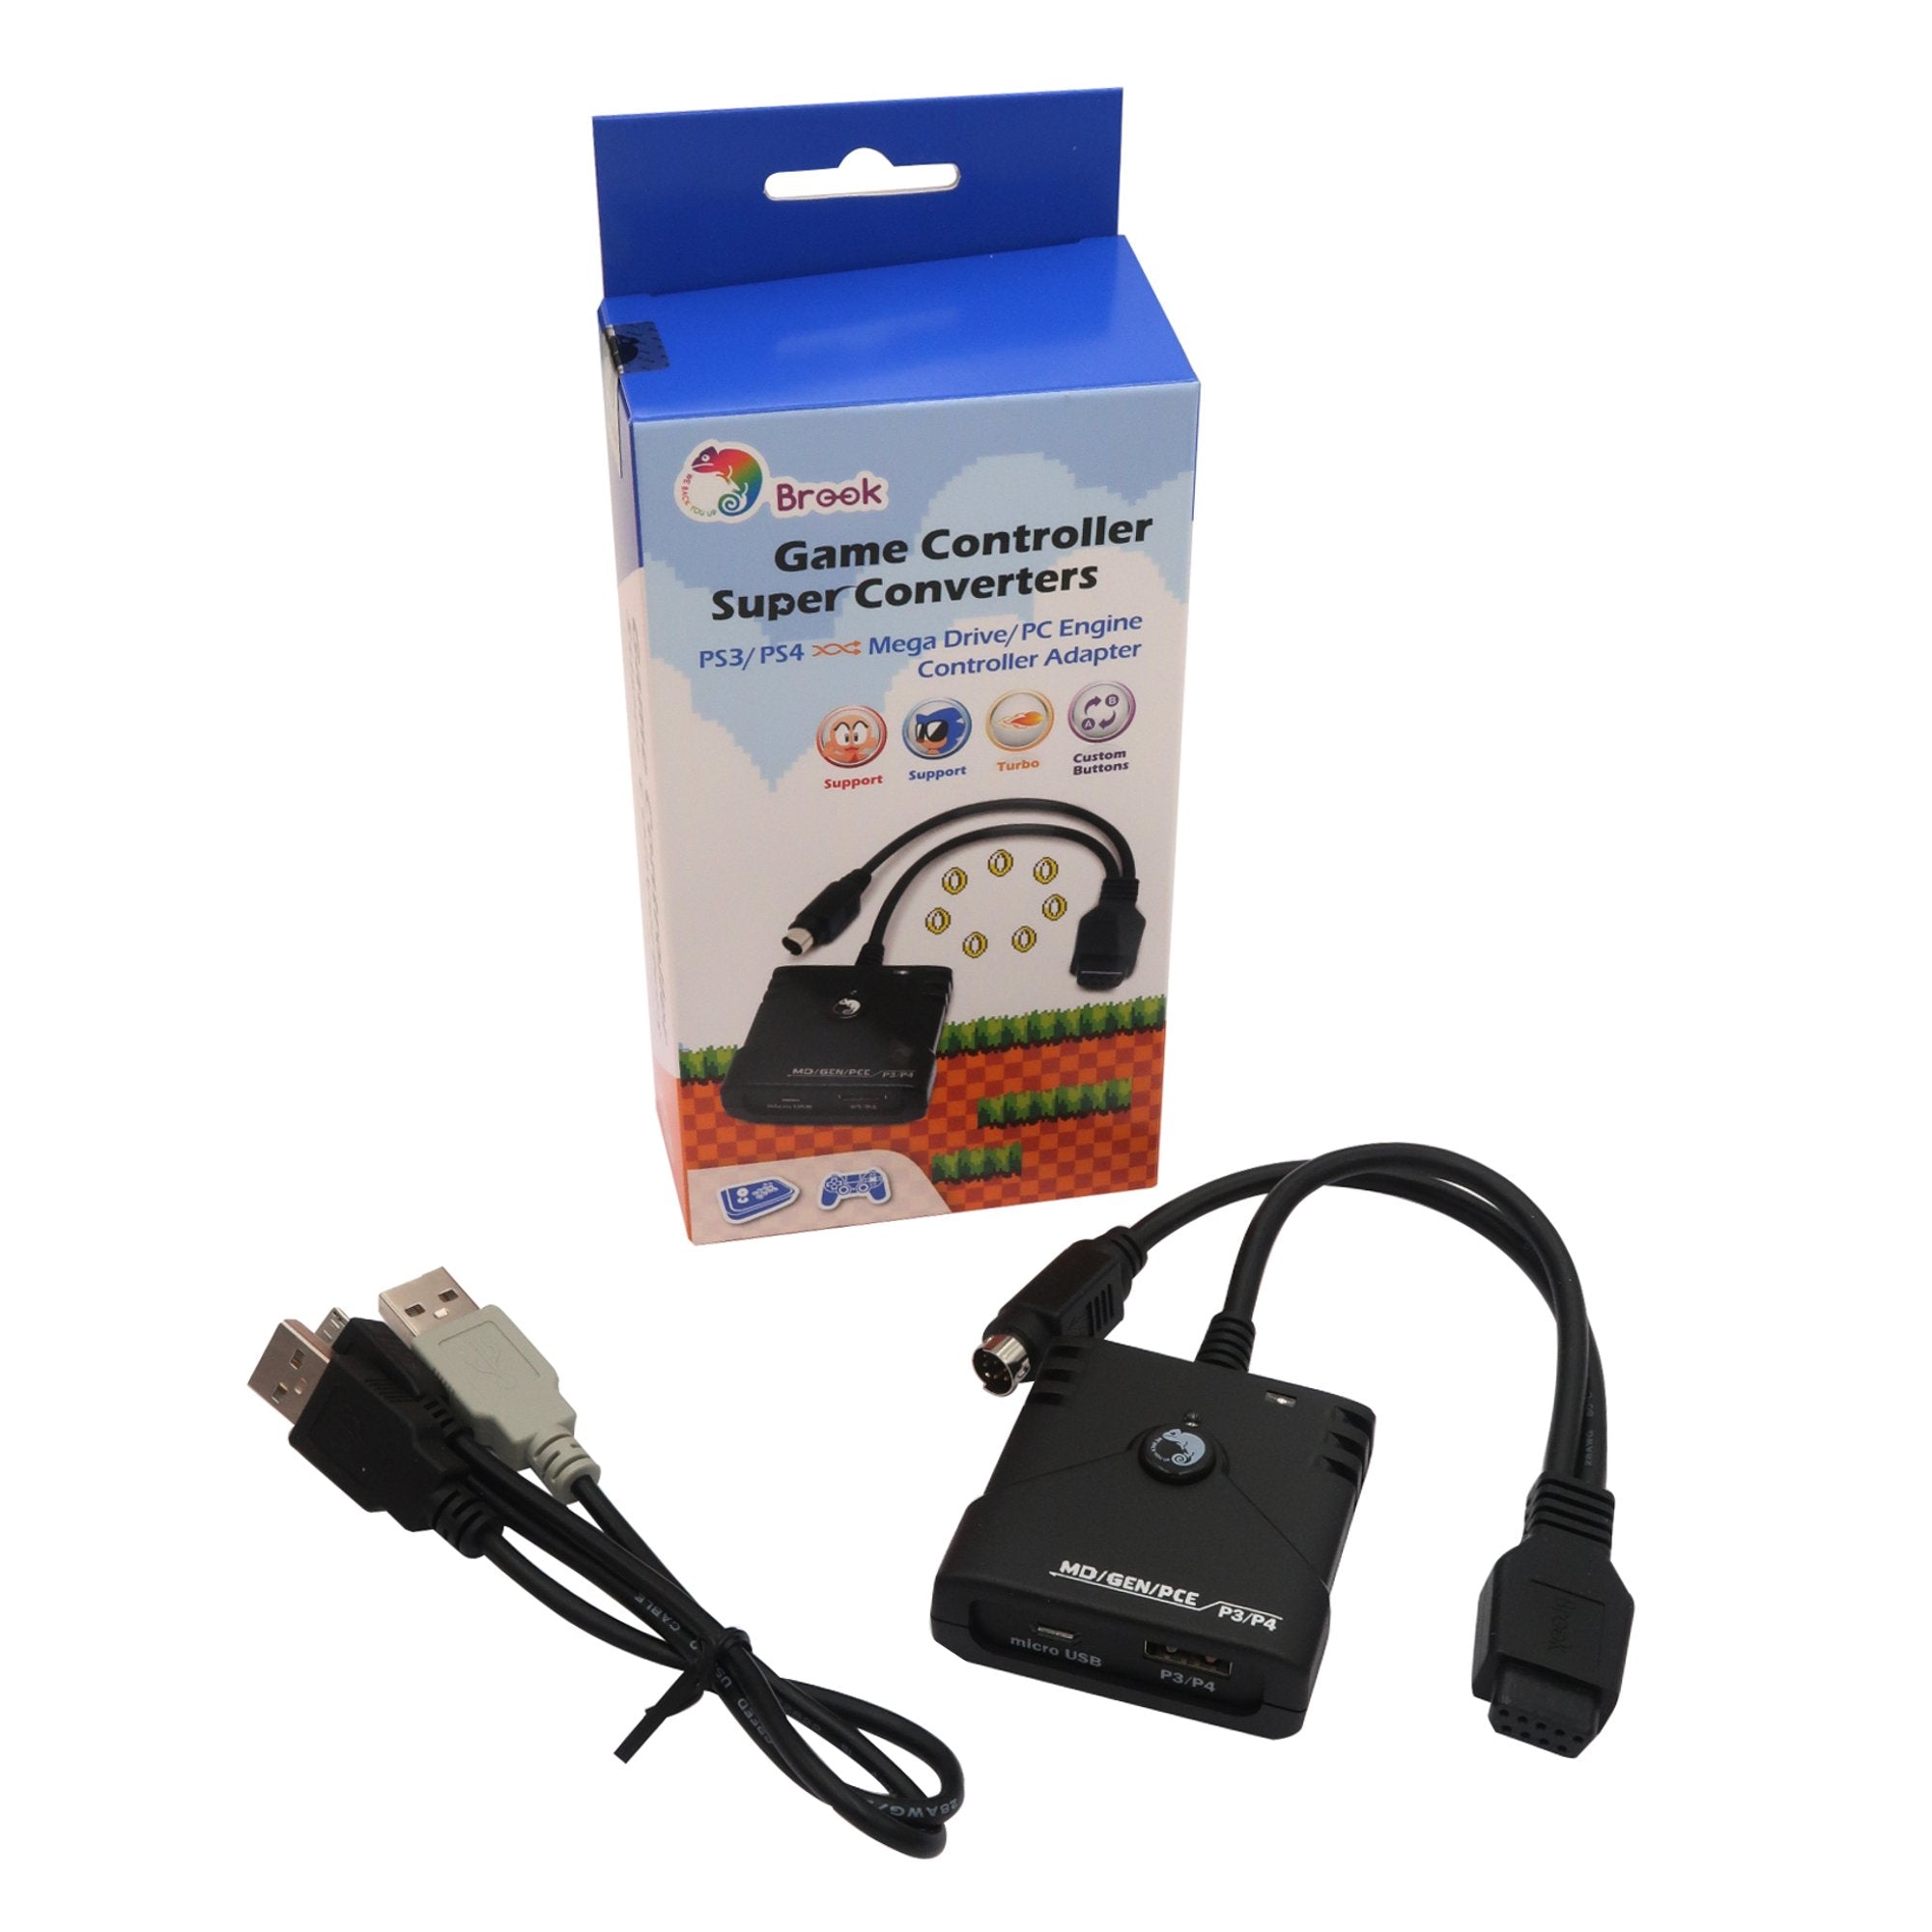 Gaming-Brook PS3/PS4 to MegaDrive/PC Engine/PC Super Converter (FM00006993)